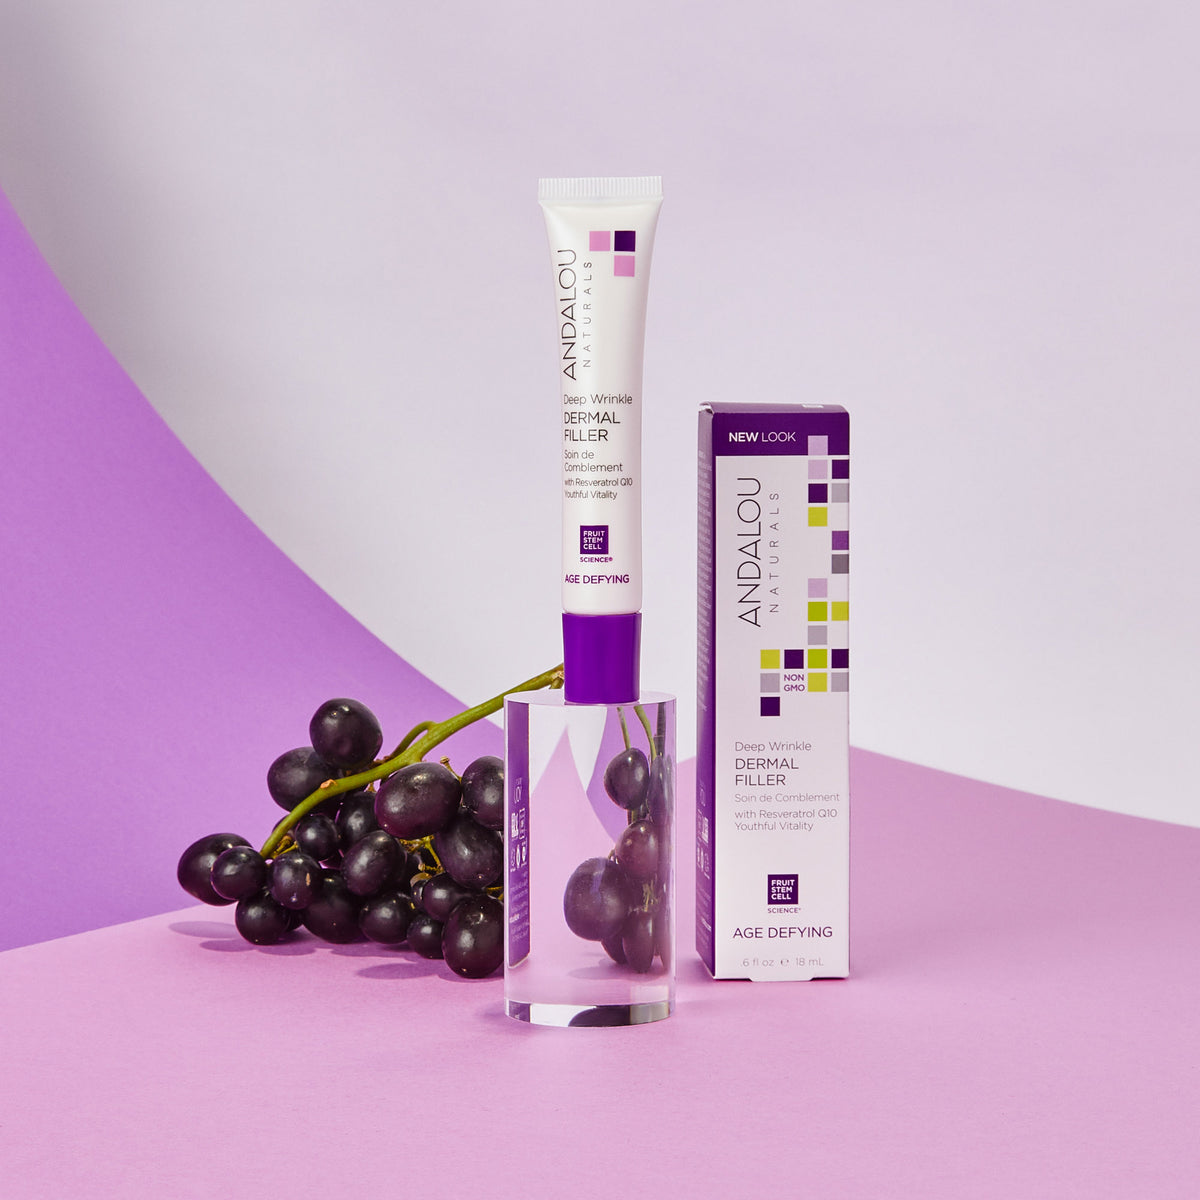 A tube of Age-Defying Deep Wrinkle Dermal Filler, placed beside grapes on a glass.